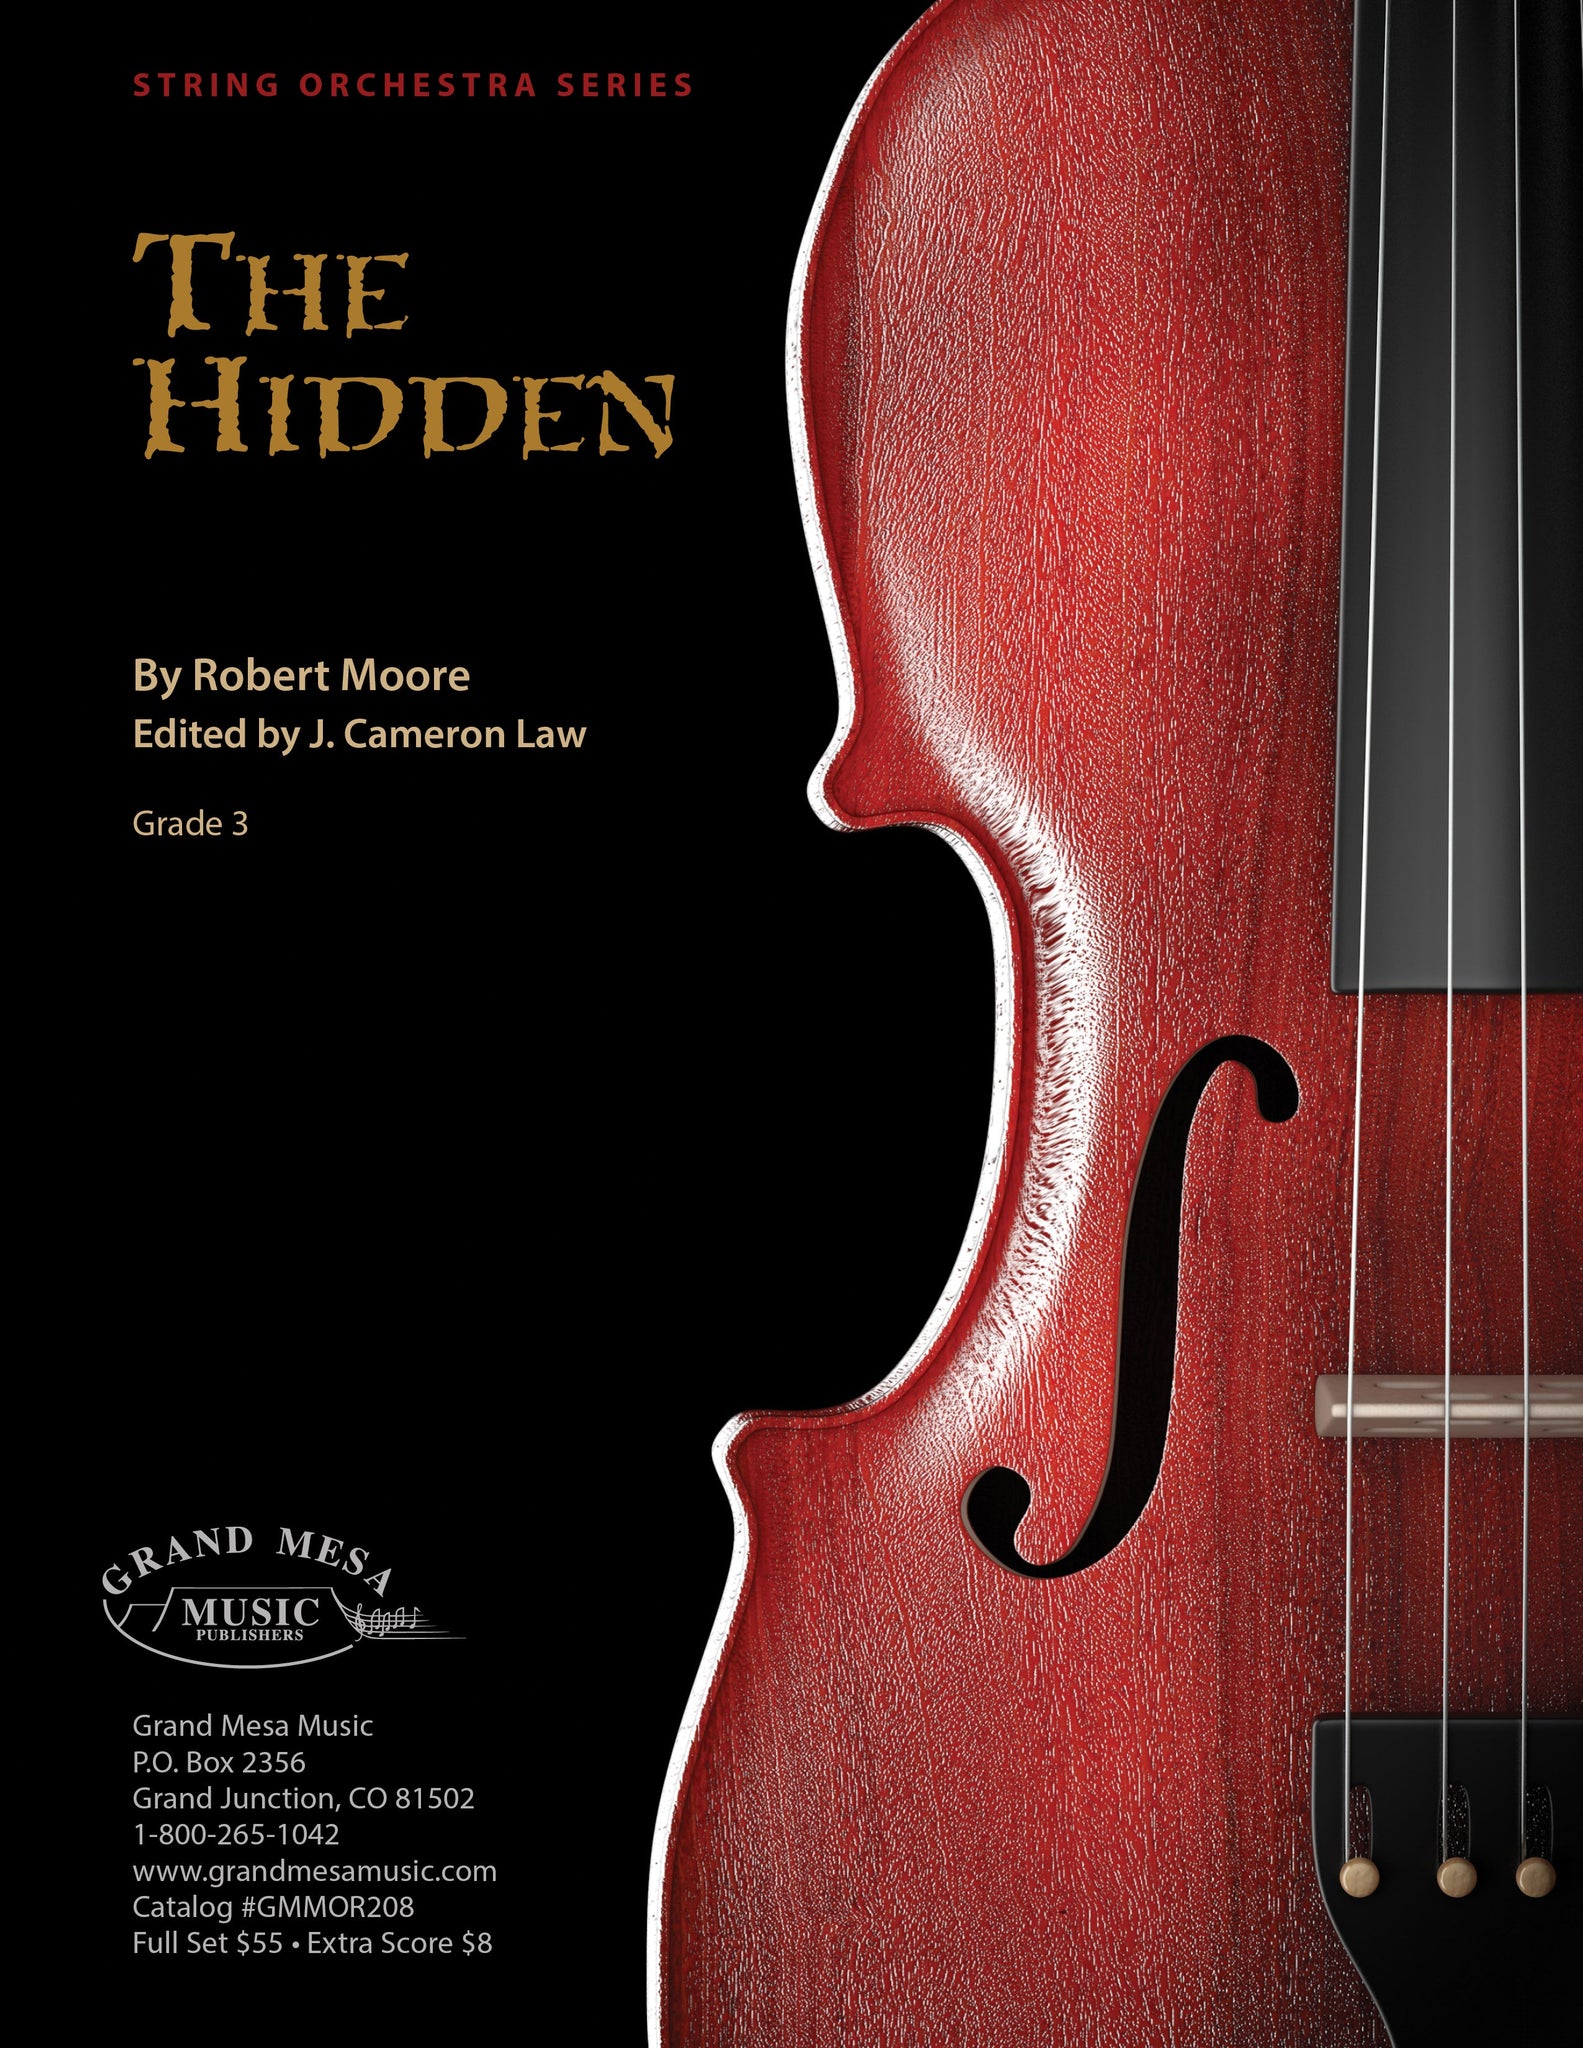 Strings sheet music cover of The Hidden, composed by Robert Moore.